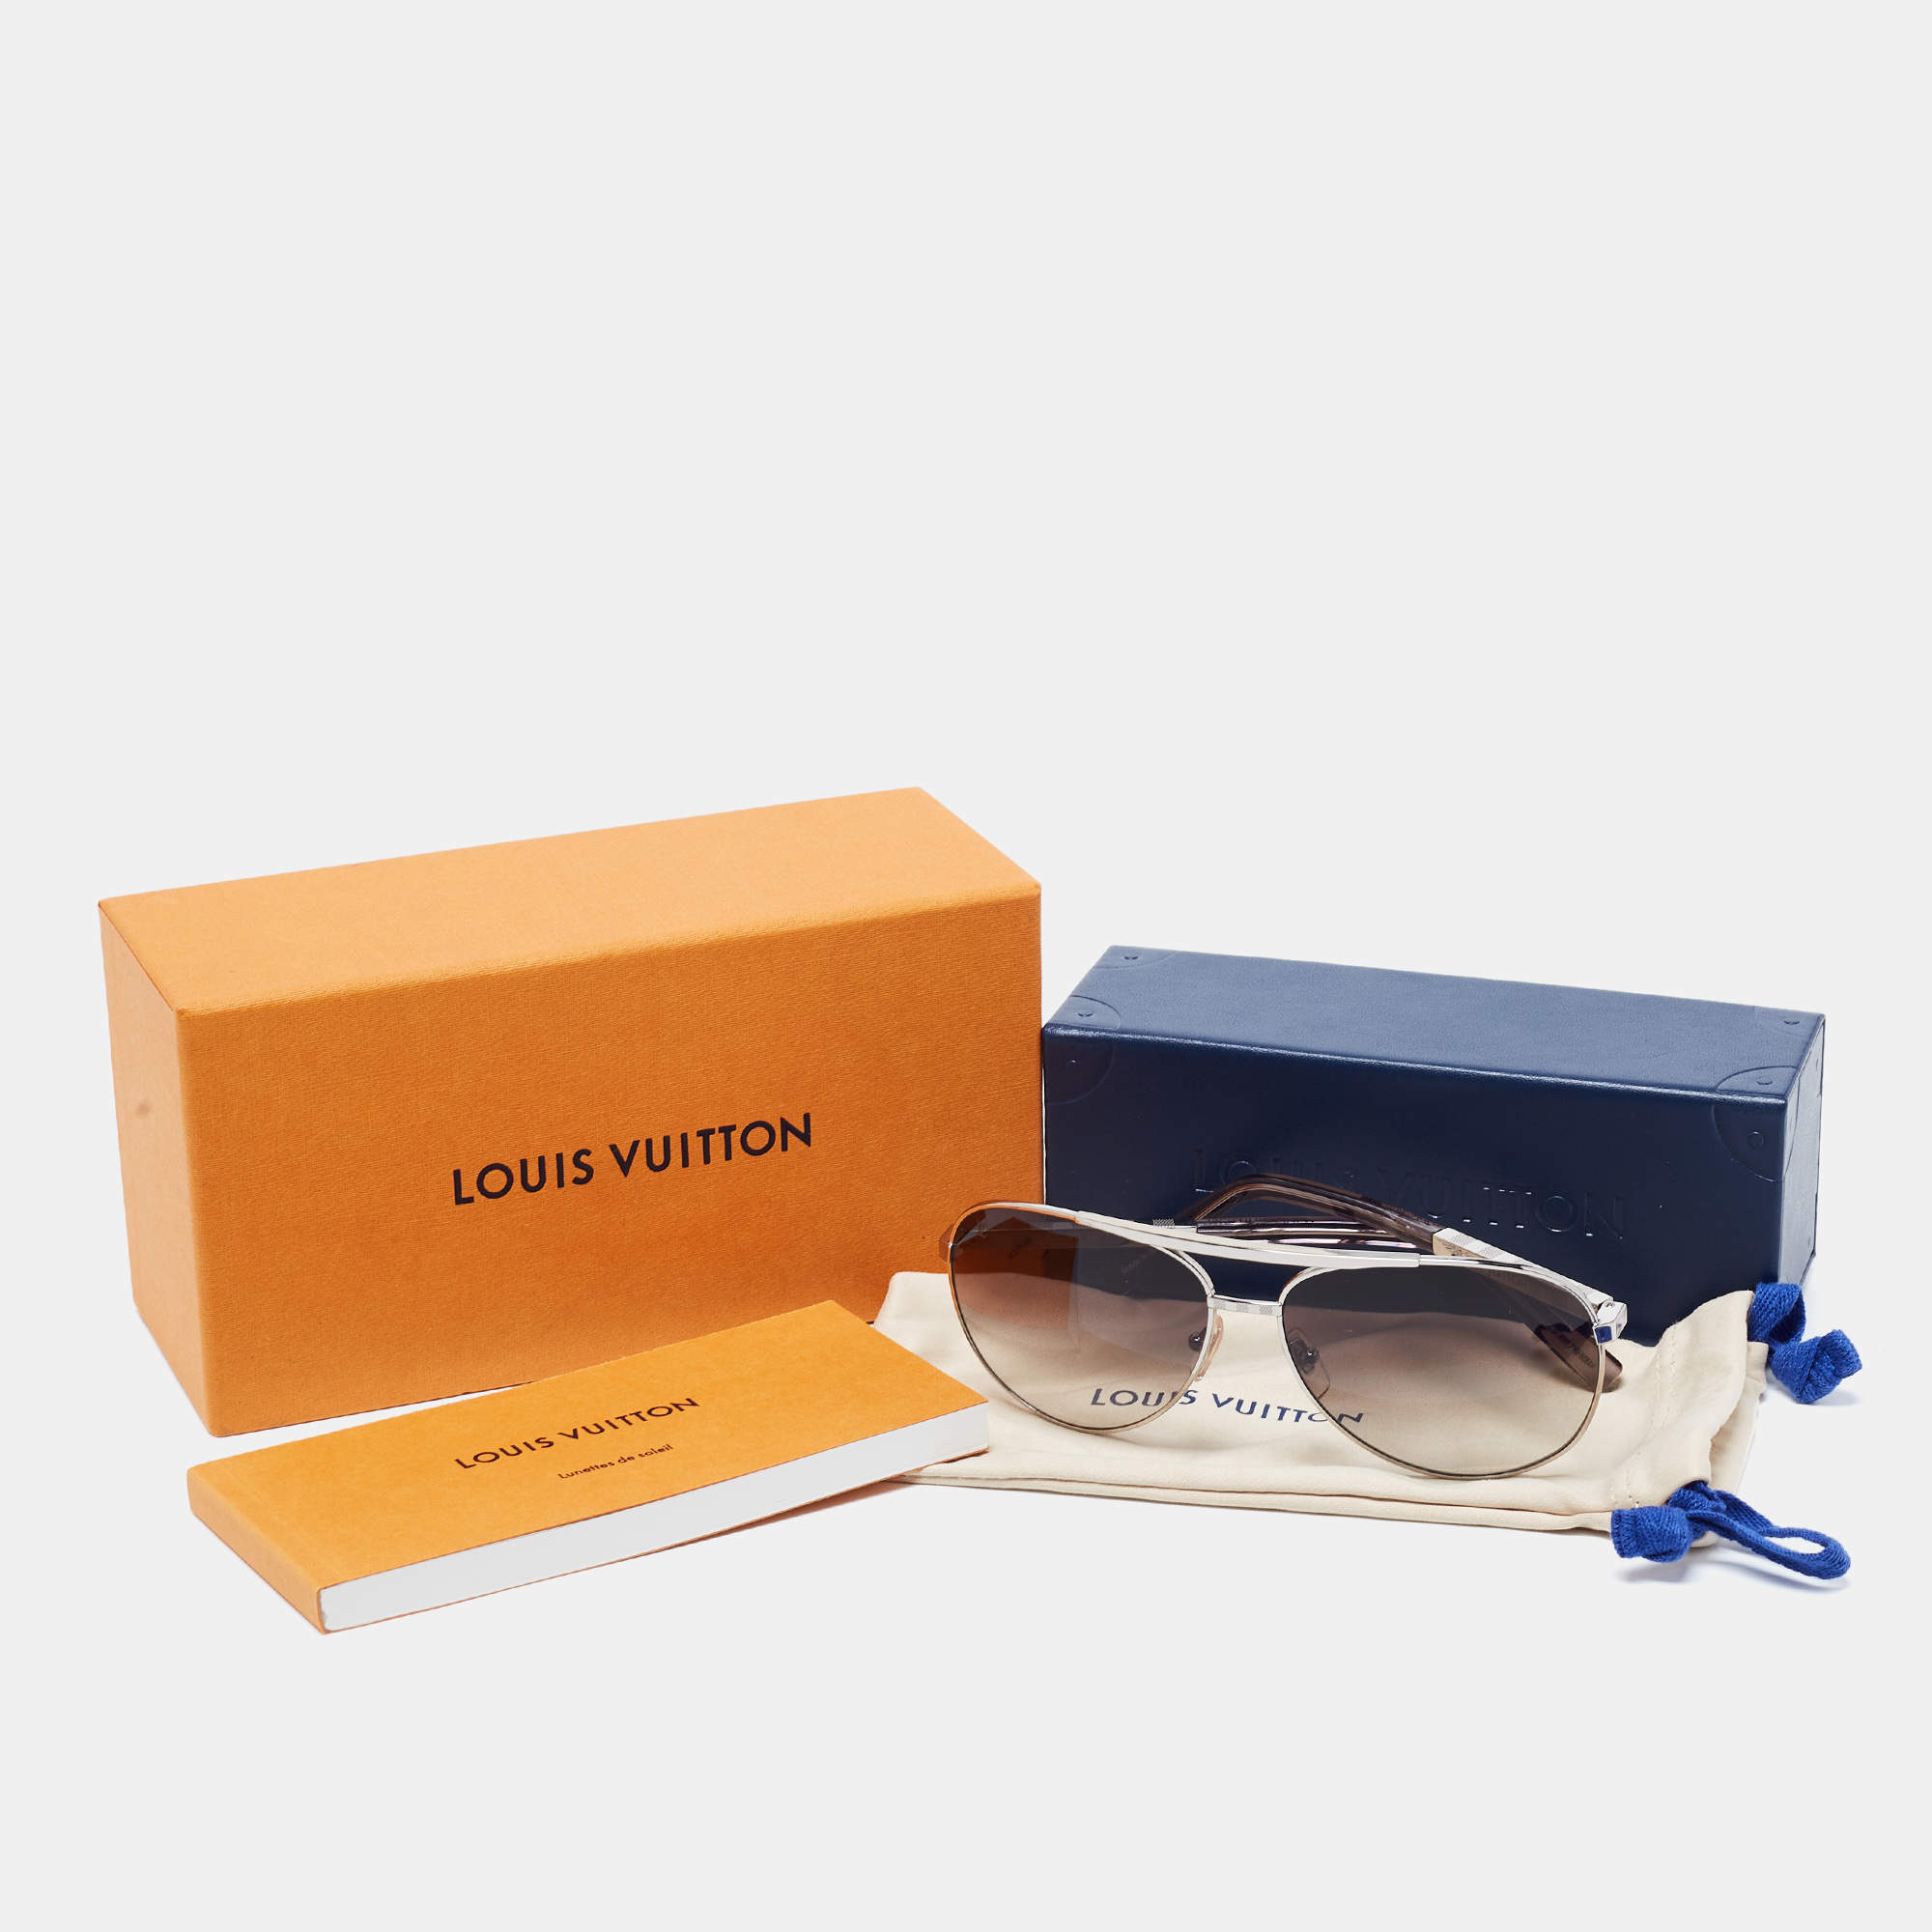 Aviator sunglasses Louis Vuitton Silver in Other - 34015740